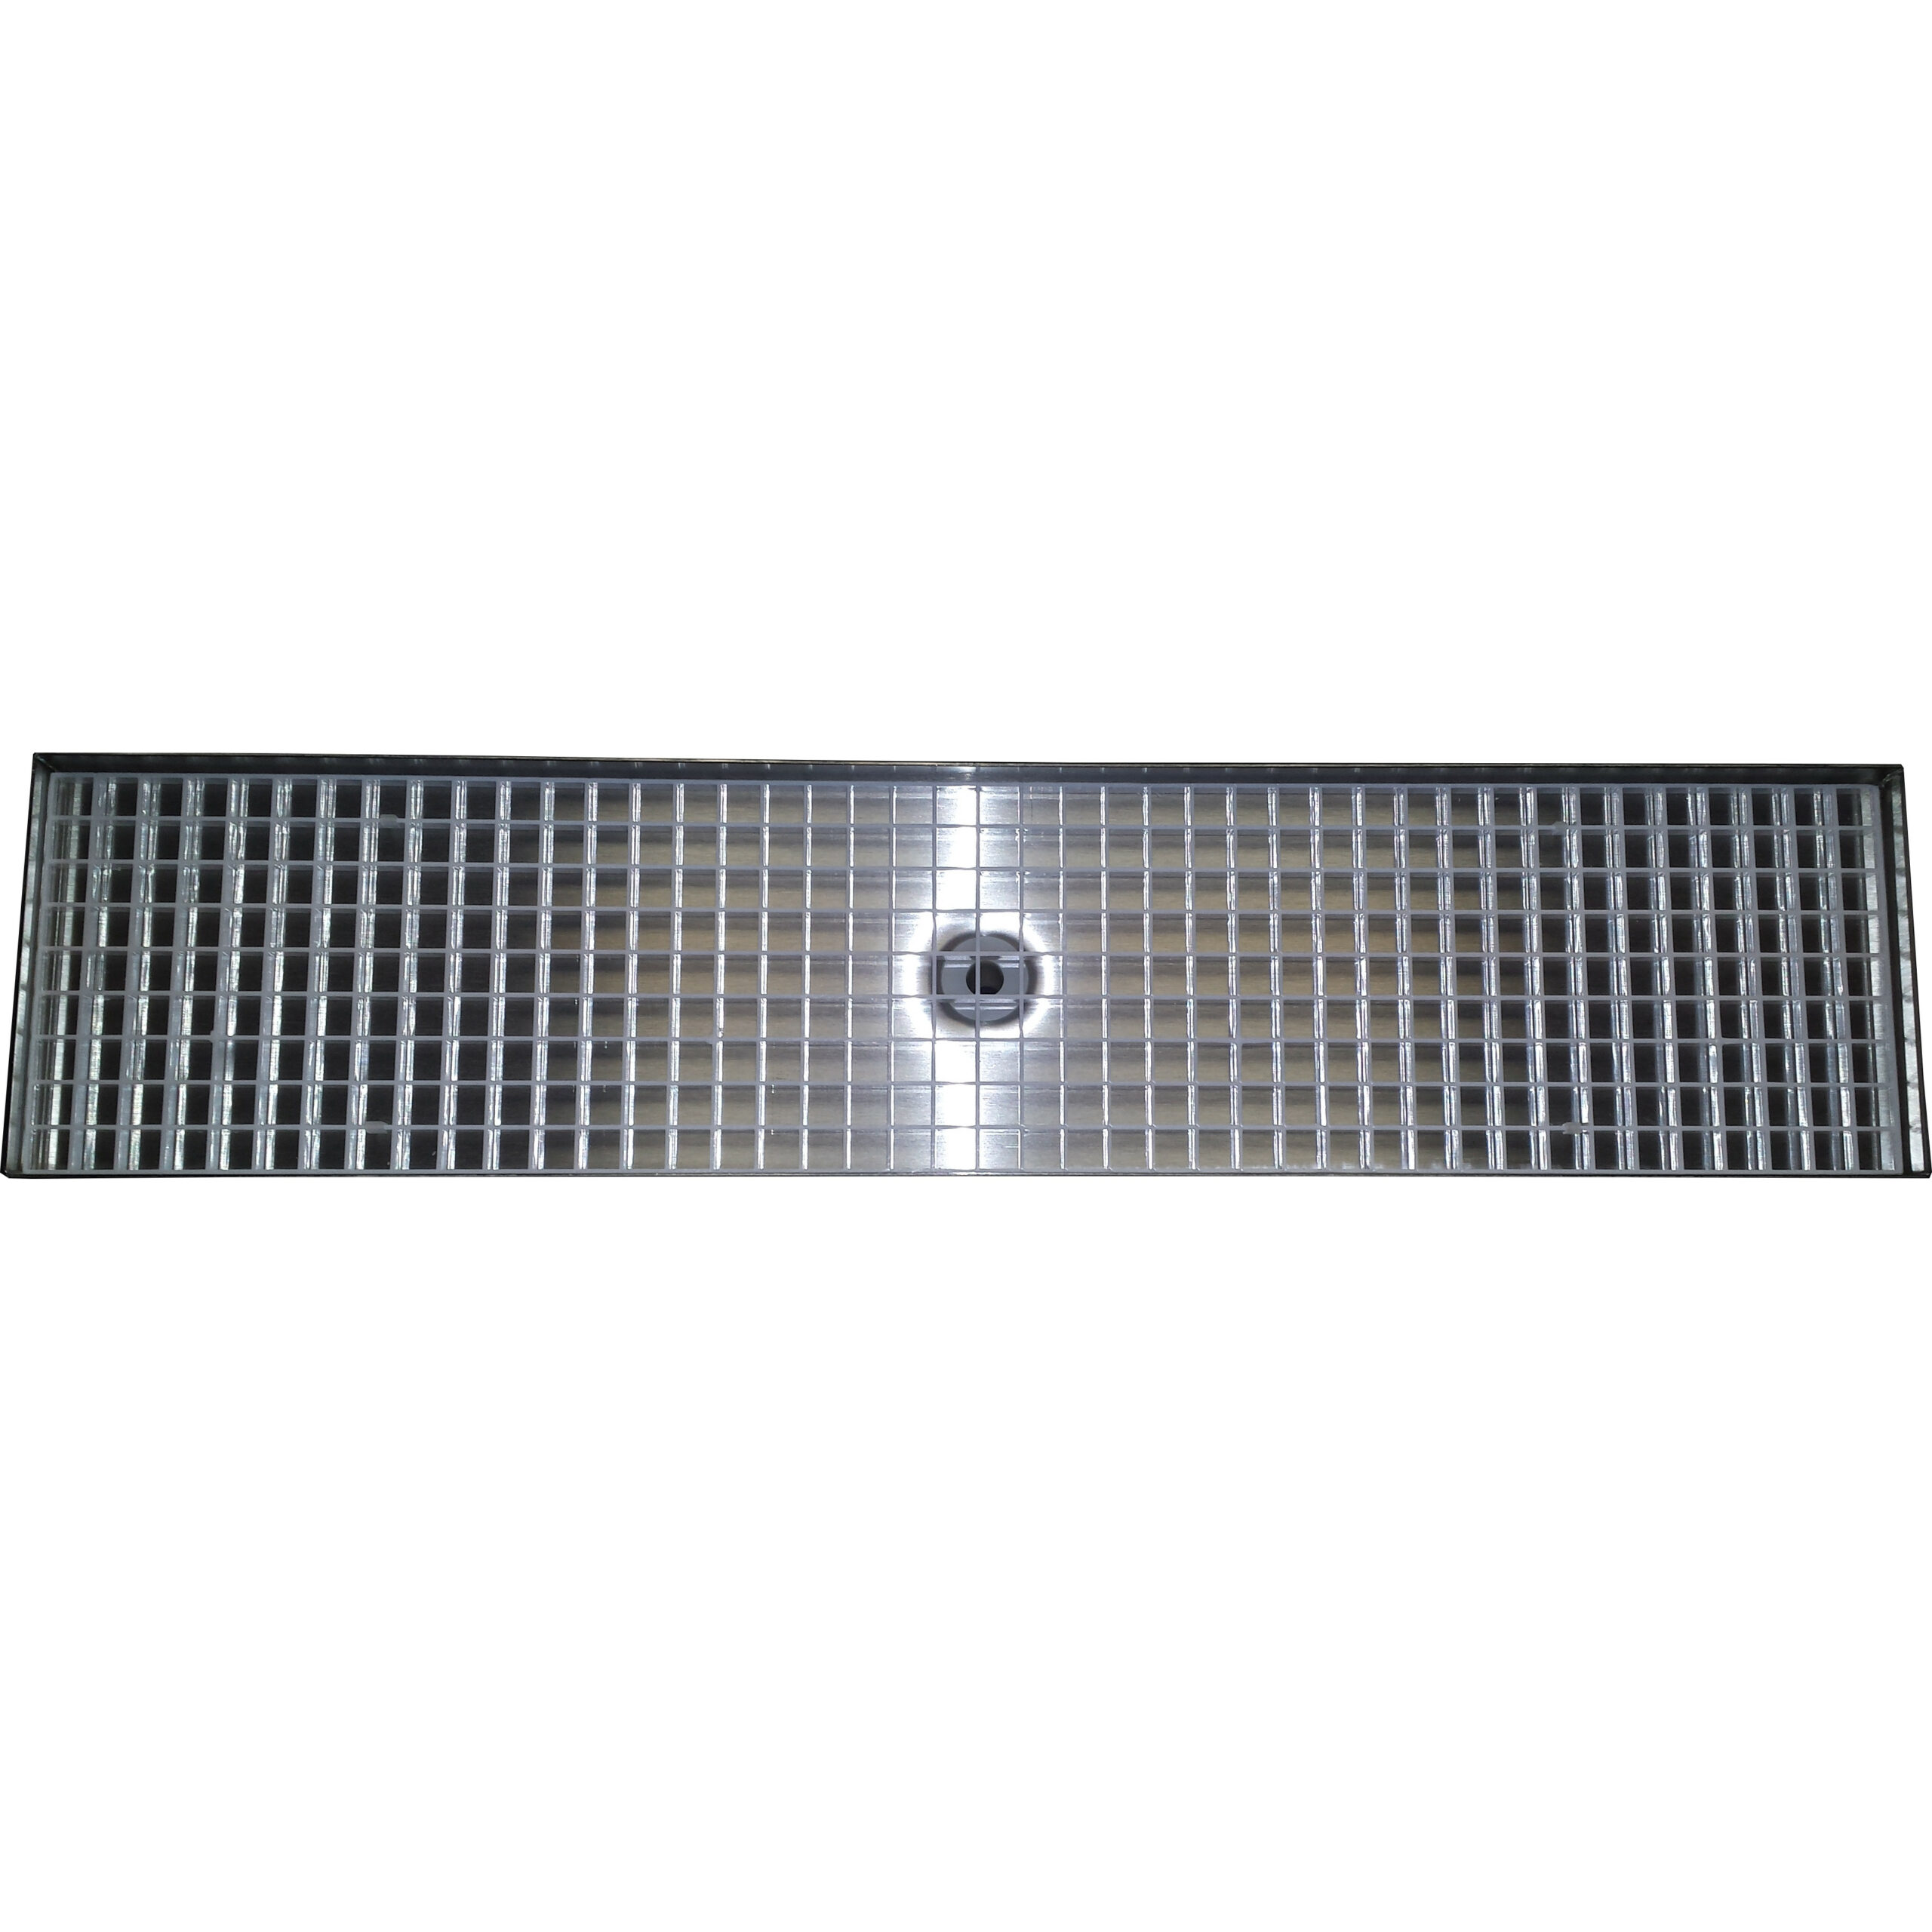 Stainless Steel 24x5 Drip Tray With, Countertop Drip Tray With Drain